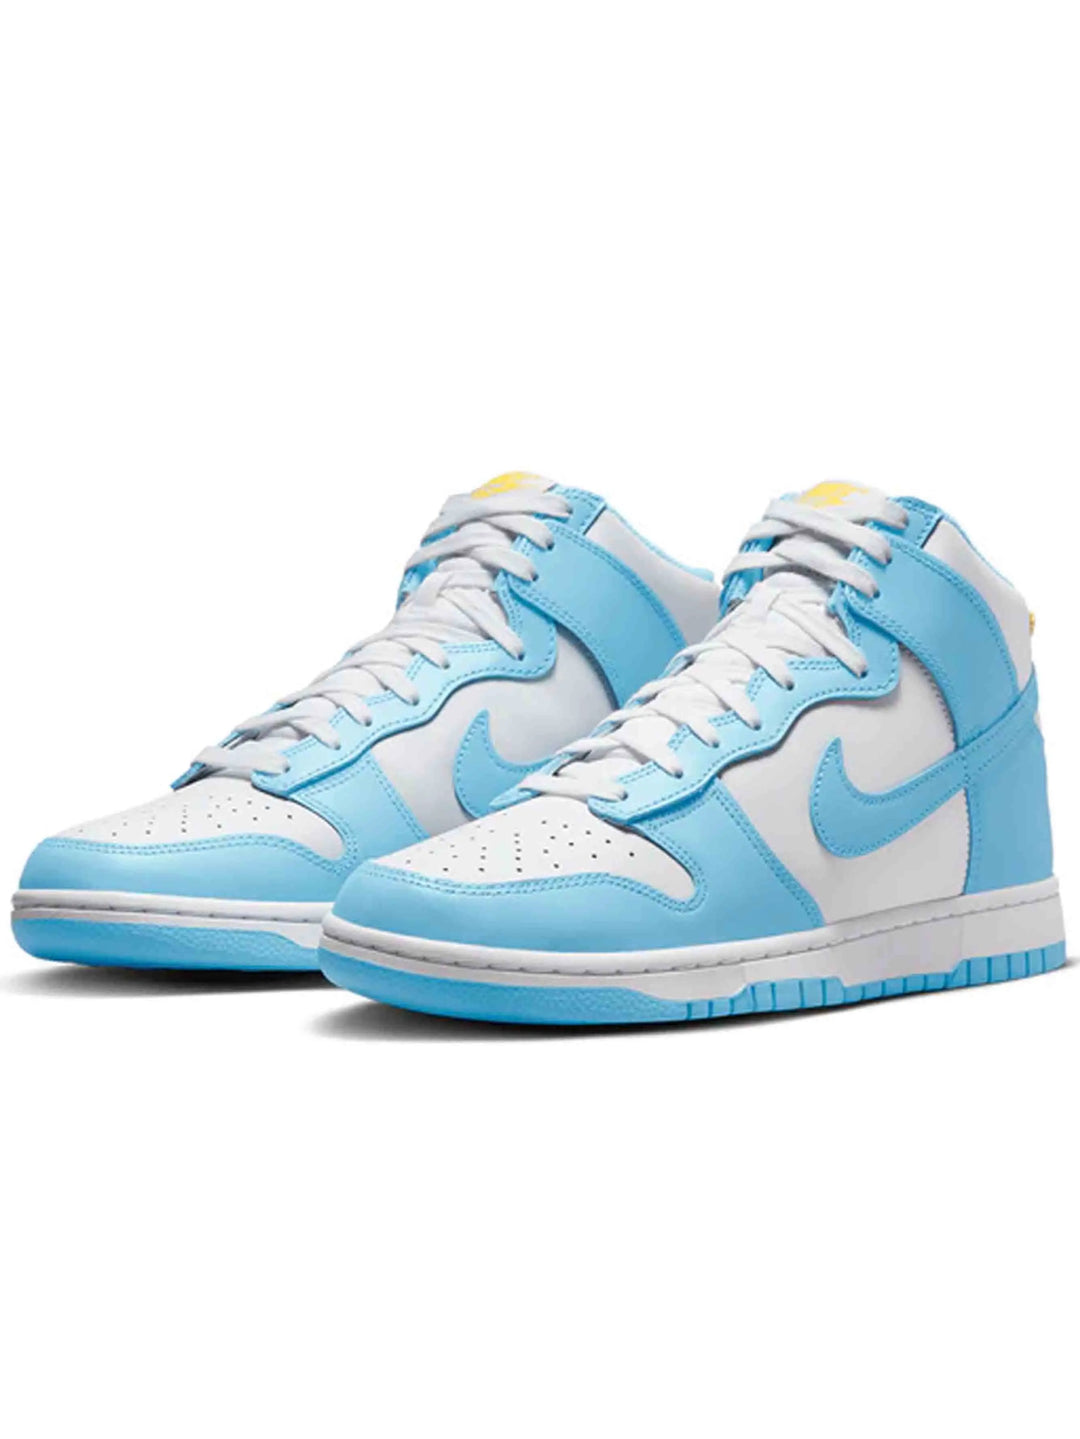 Nike Dunk High Blue Chill Prior